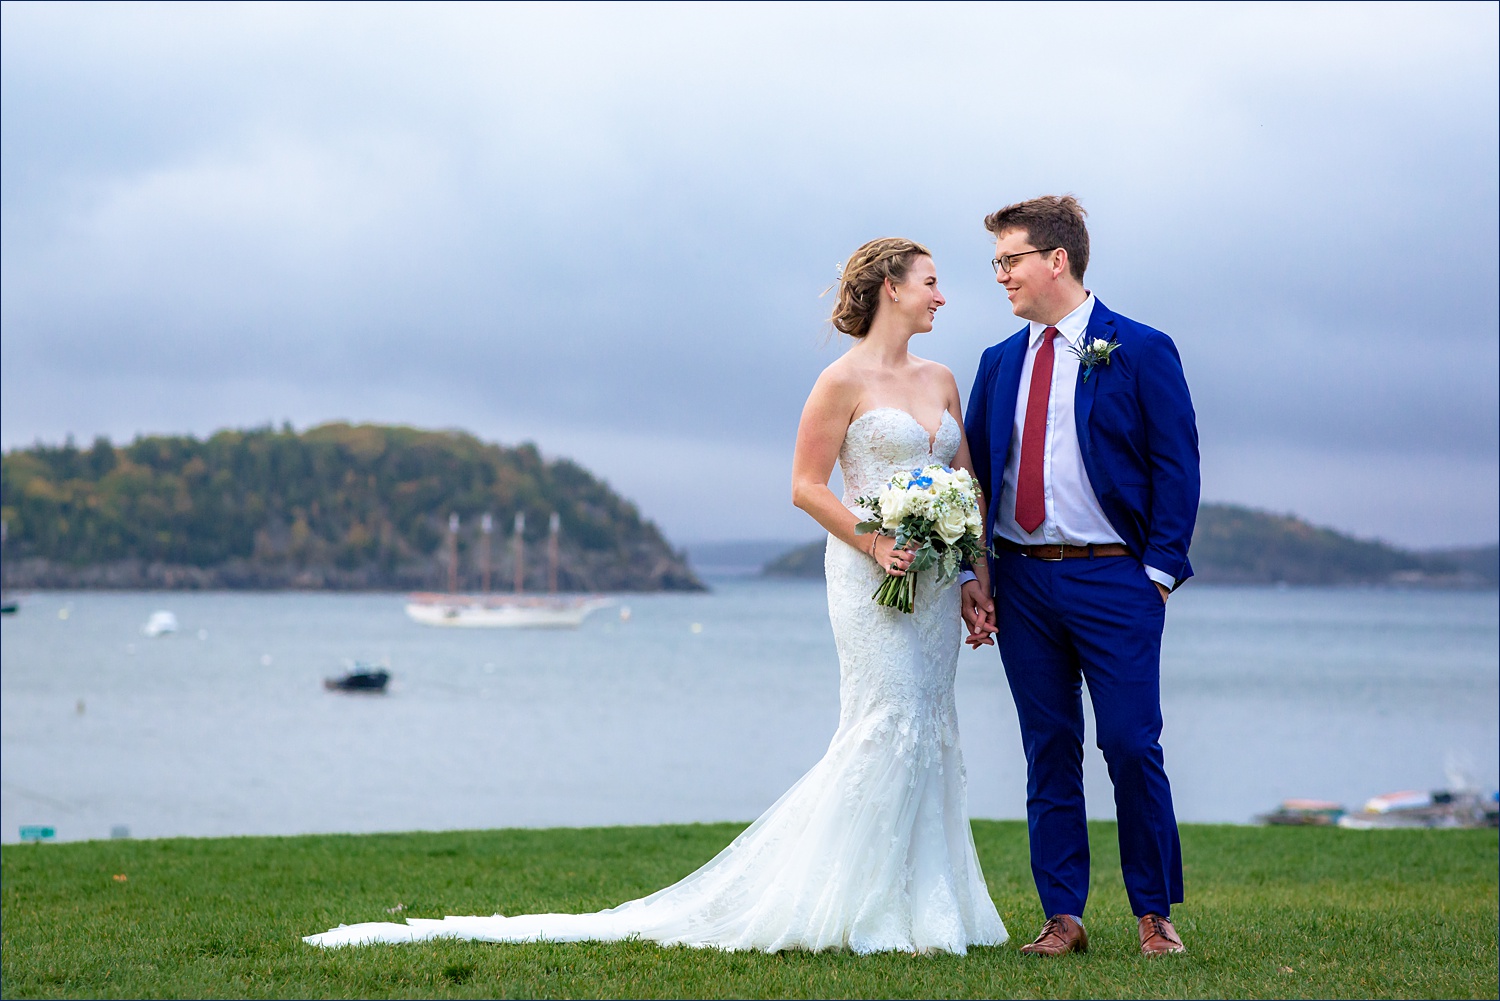 Wedding couple at Agamont Park in Bar Harbor Maine